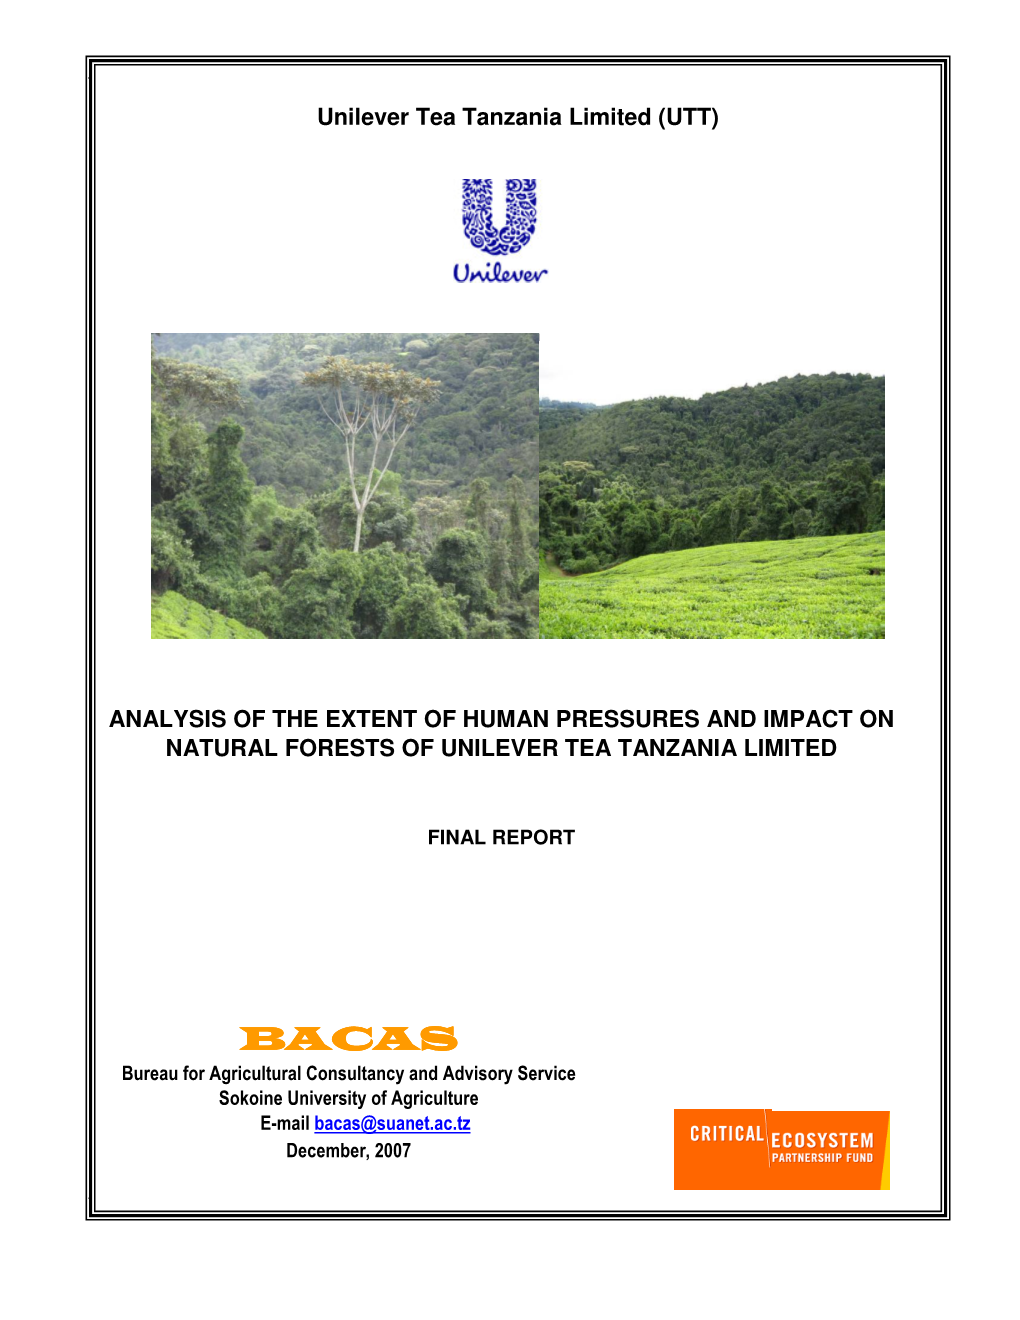 Analysis of the Extent of Human Pressures and Impact on Natural Forests of Uttl